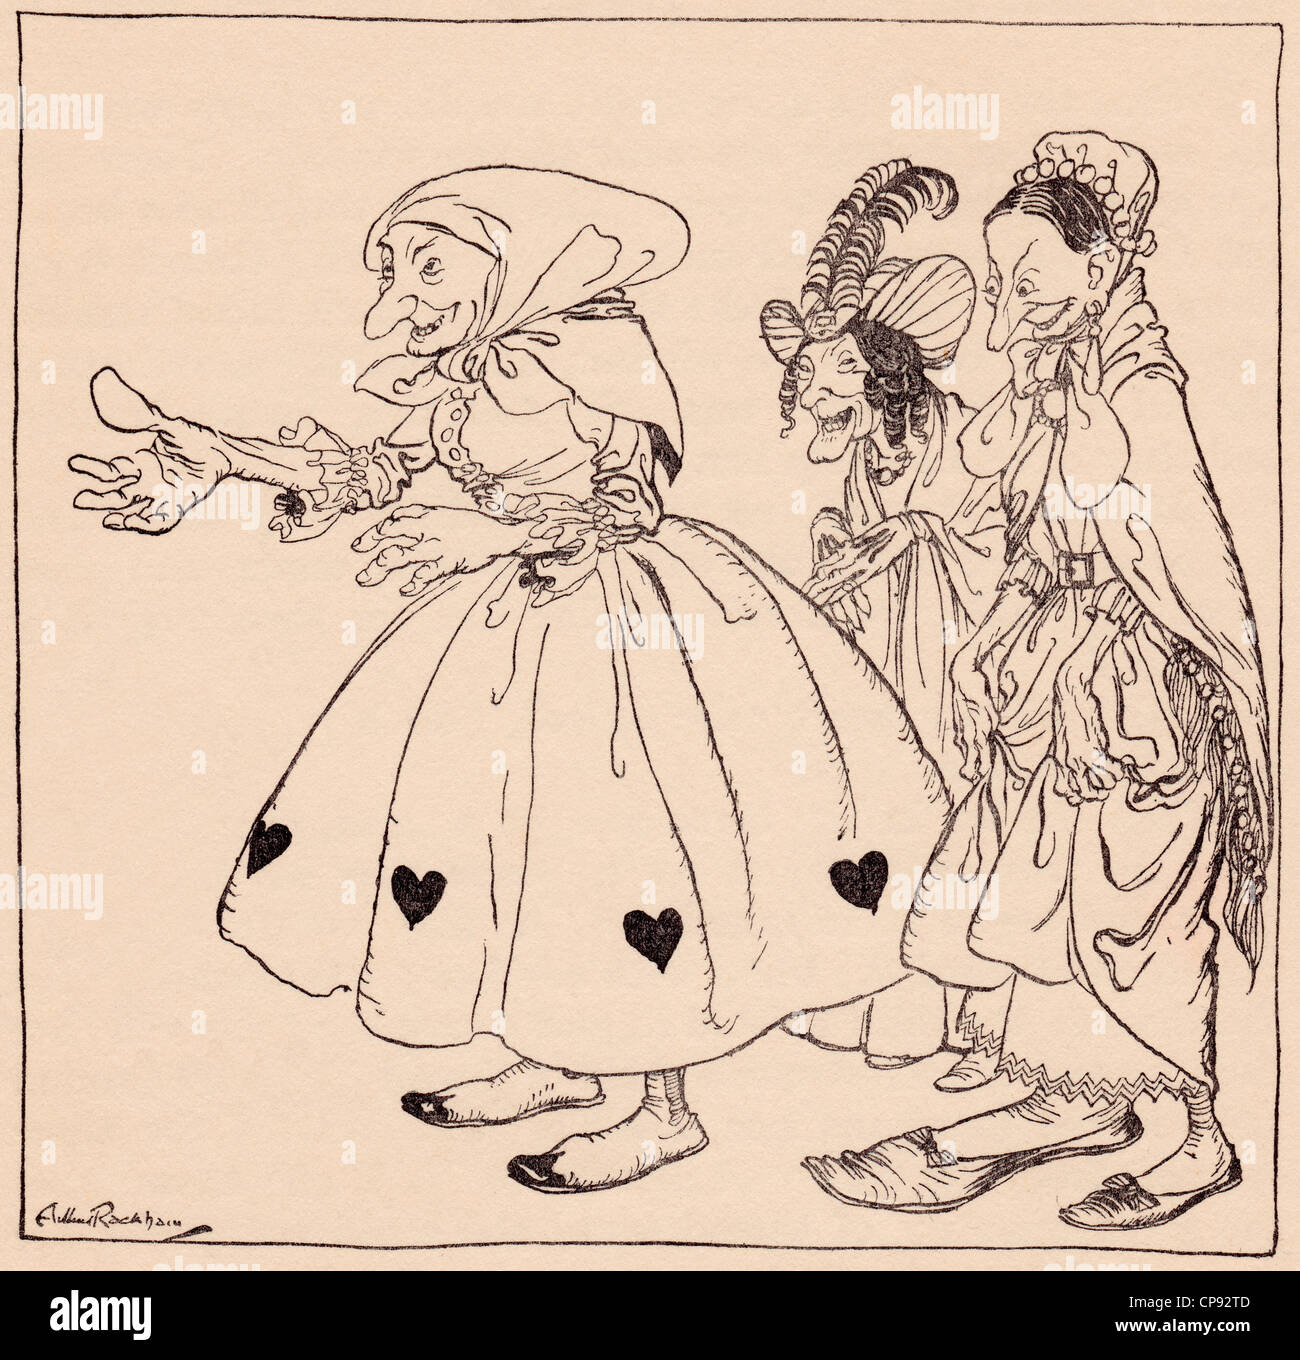 In came the three women dressed in the stangest fashion. Illustration by Arthur Rackham from Grimm's Fairy Tale Stock Photo